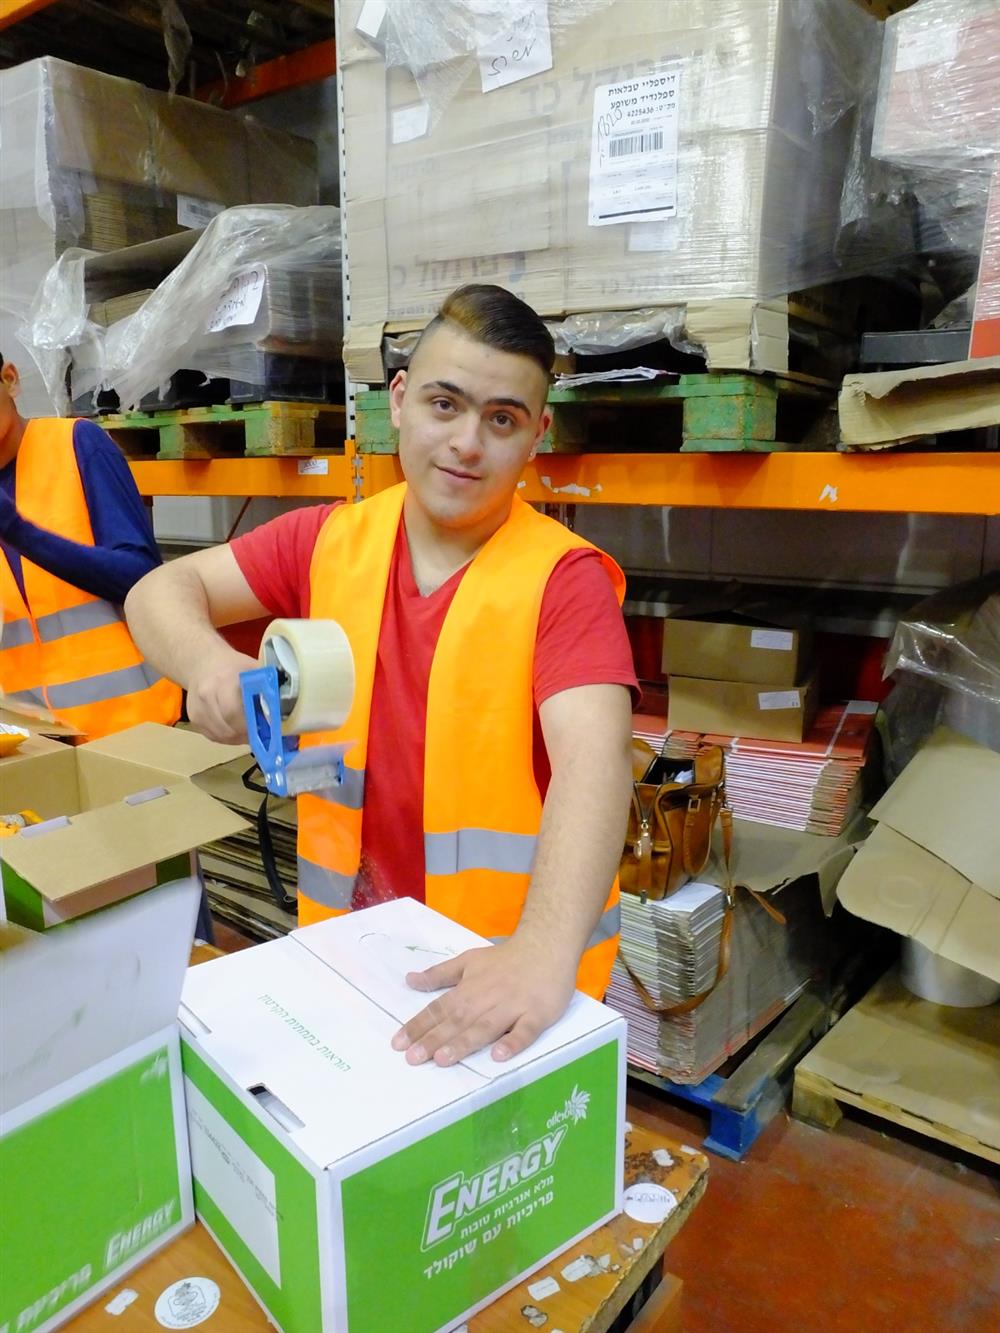 A young man is packing boxes during his job training in the warehouse in front of full shelves.